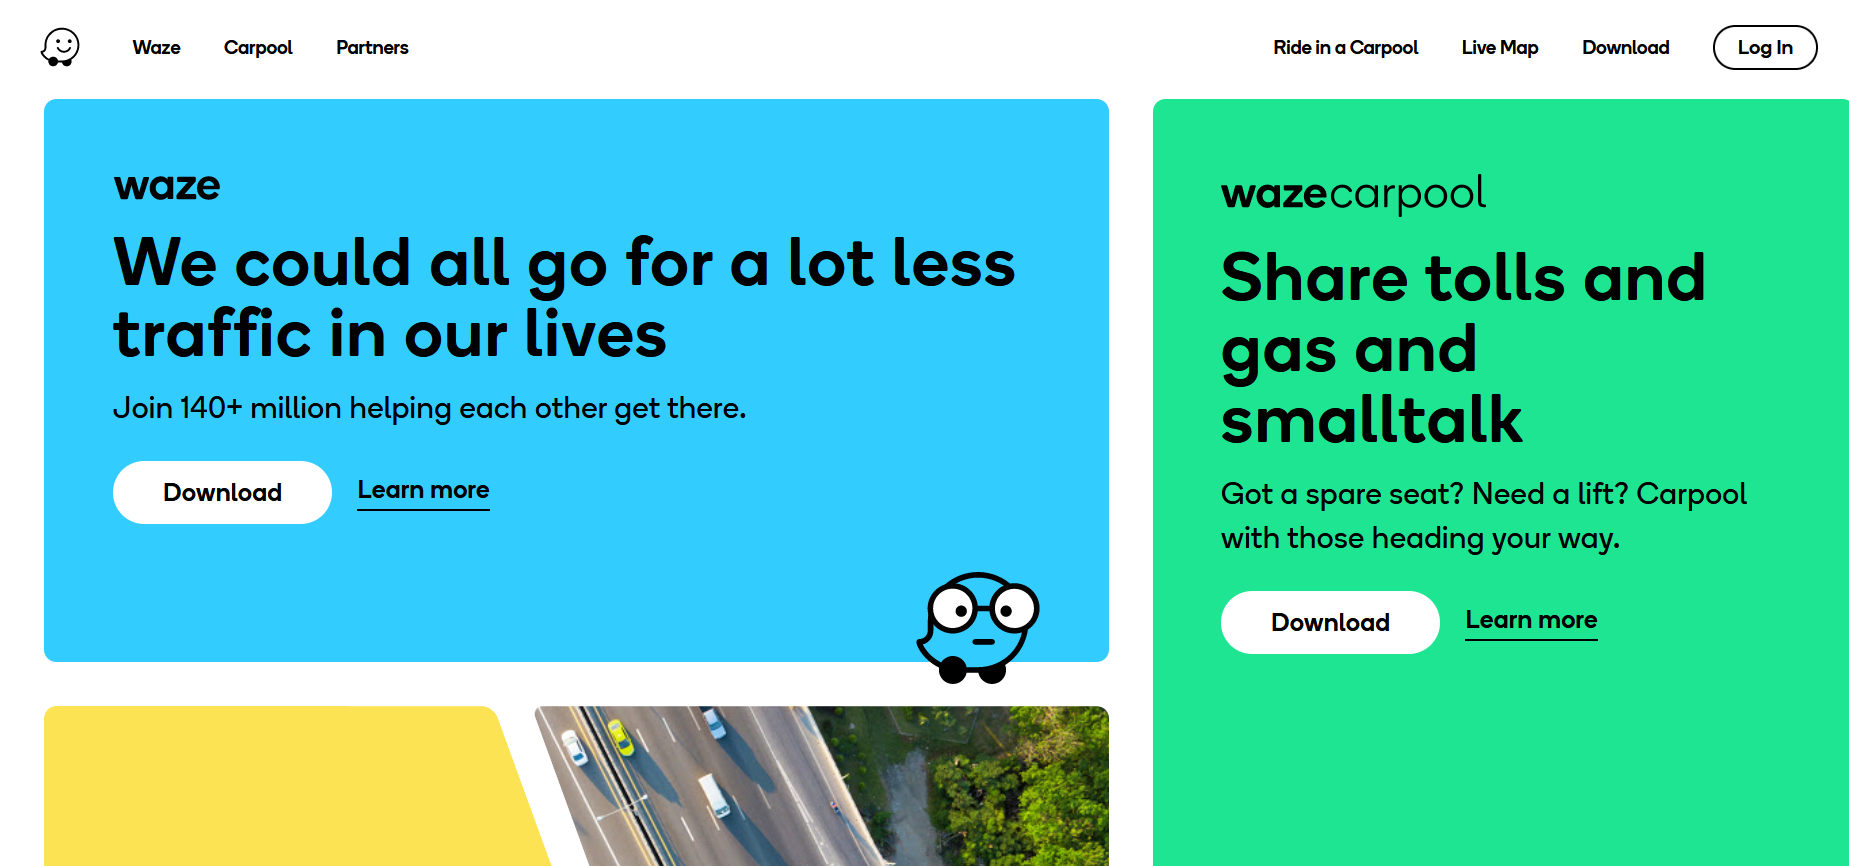 Waze navigation app with gas prices